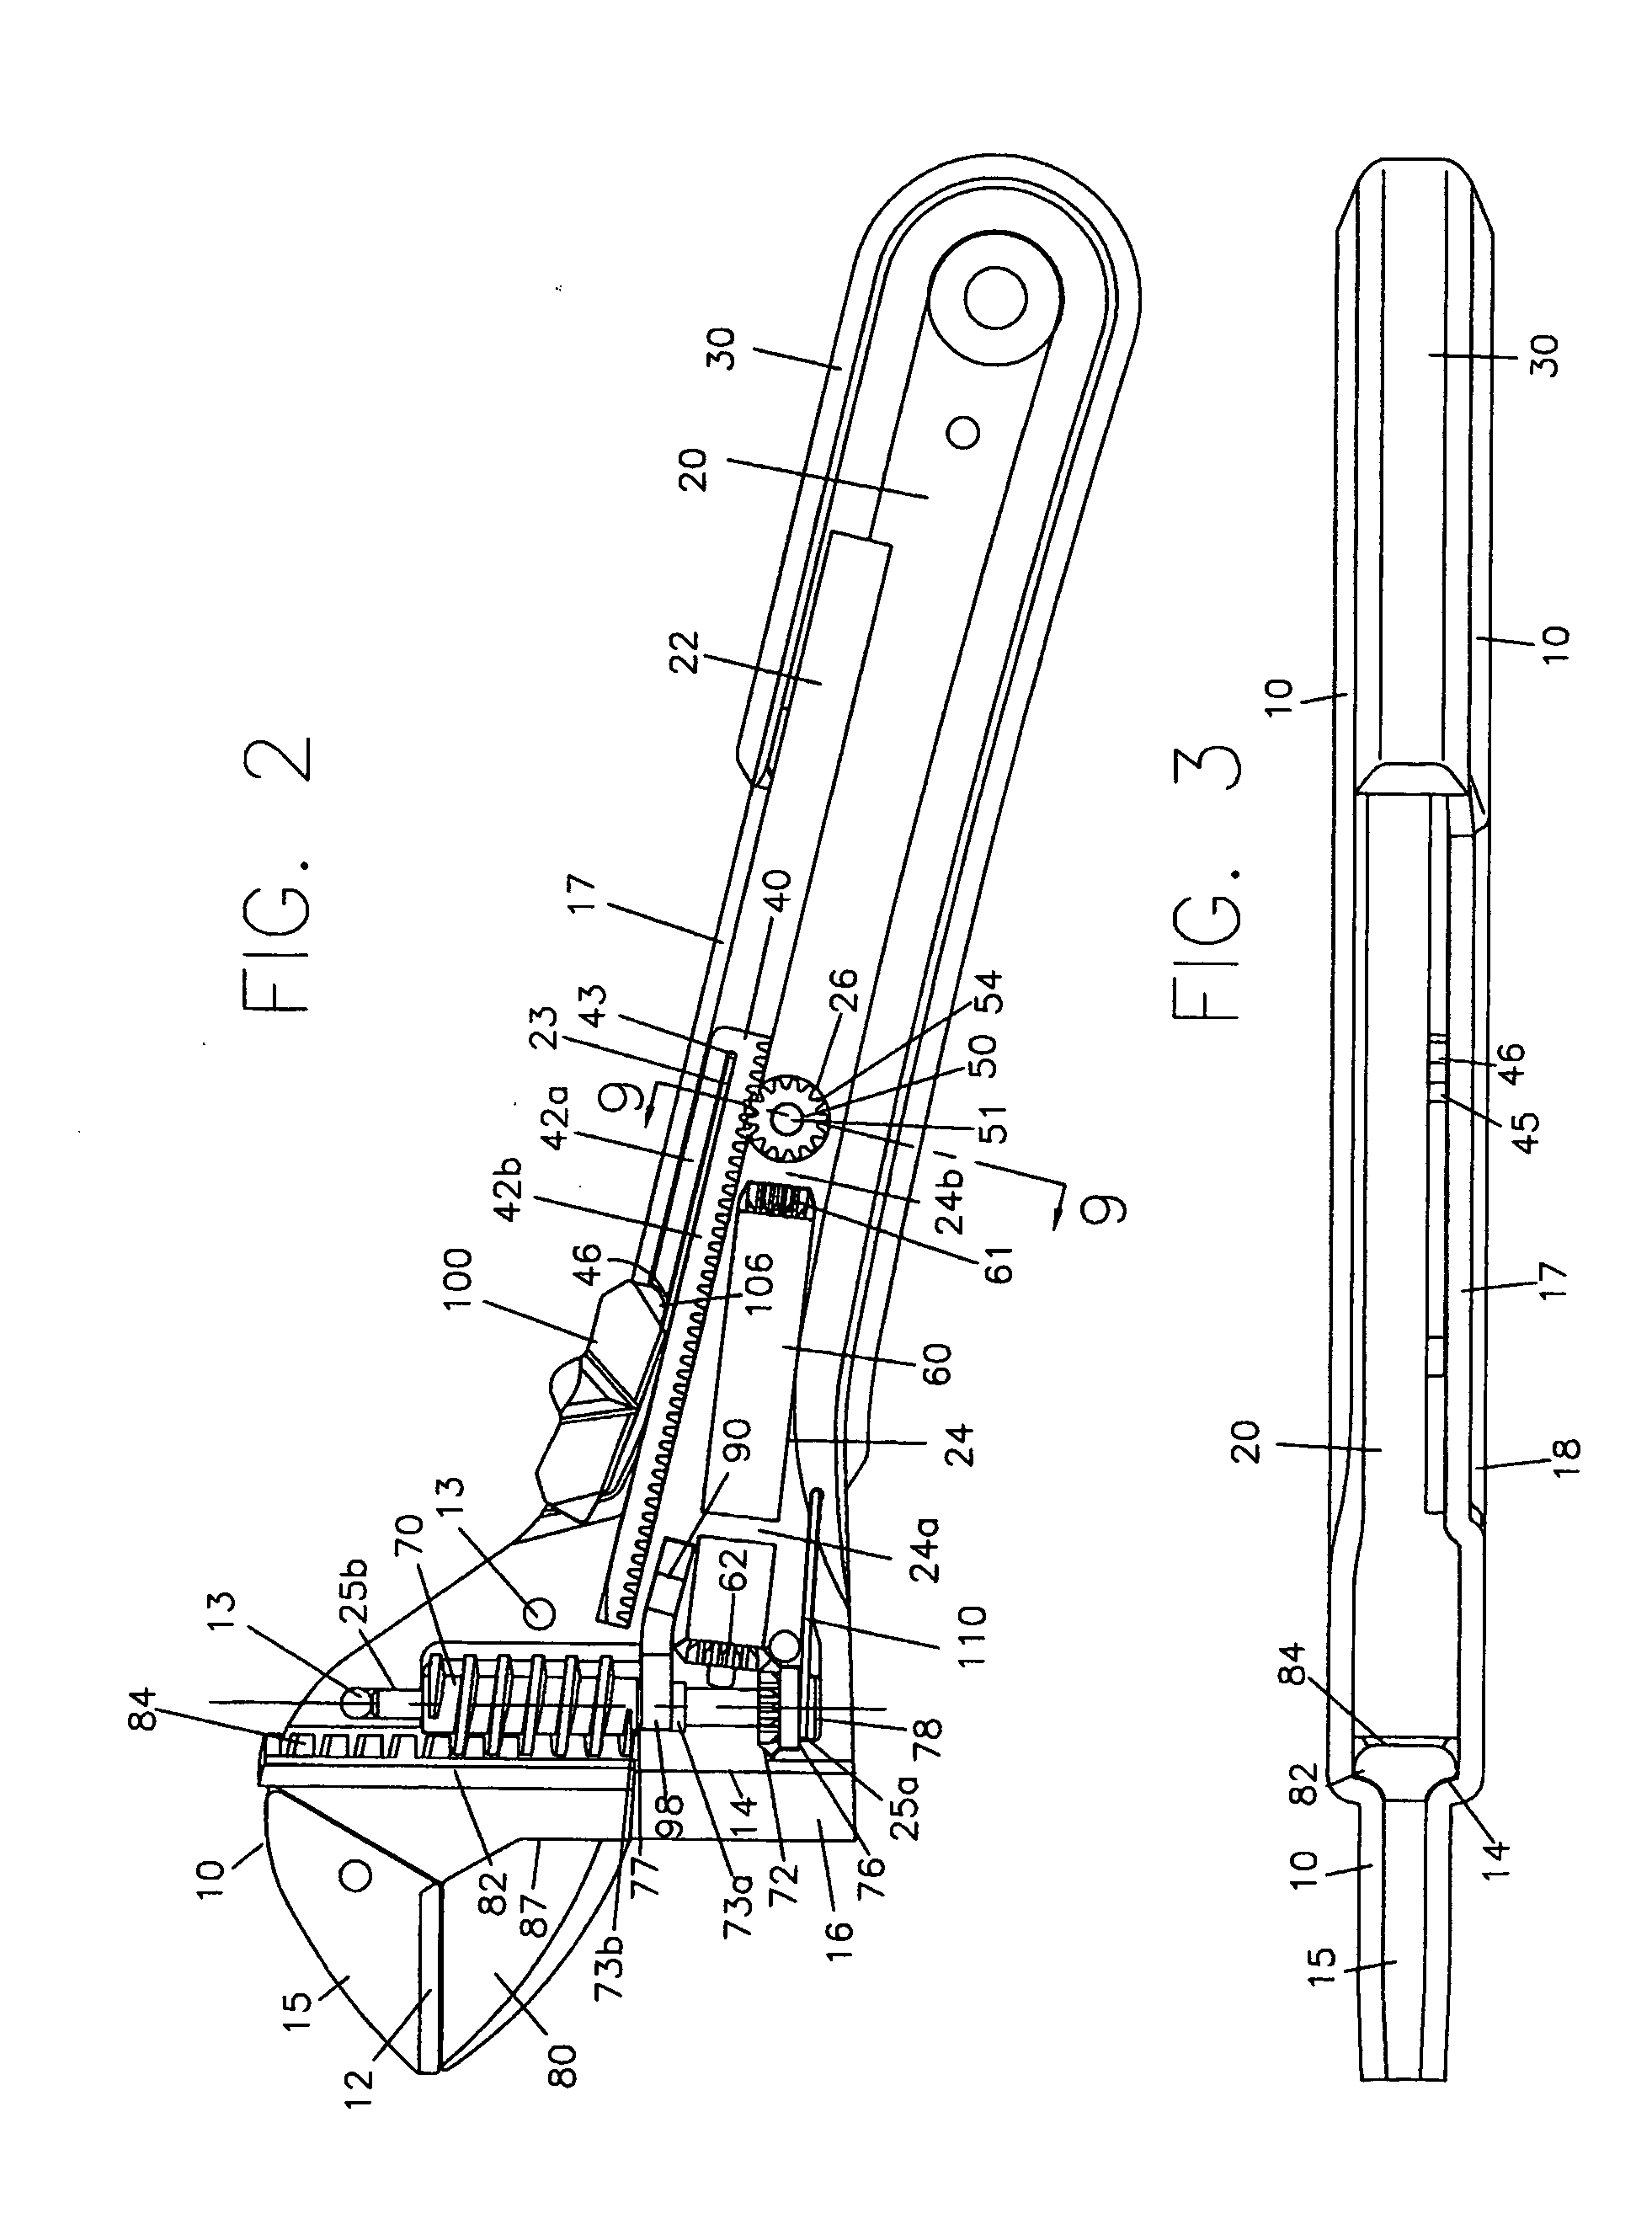 Laminated wrench construction system